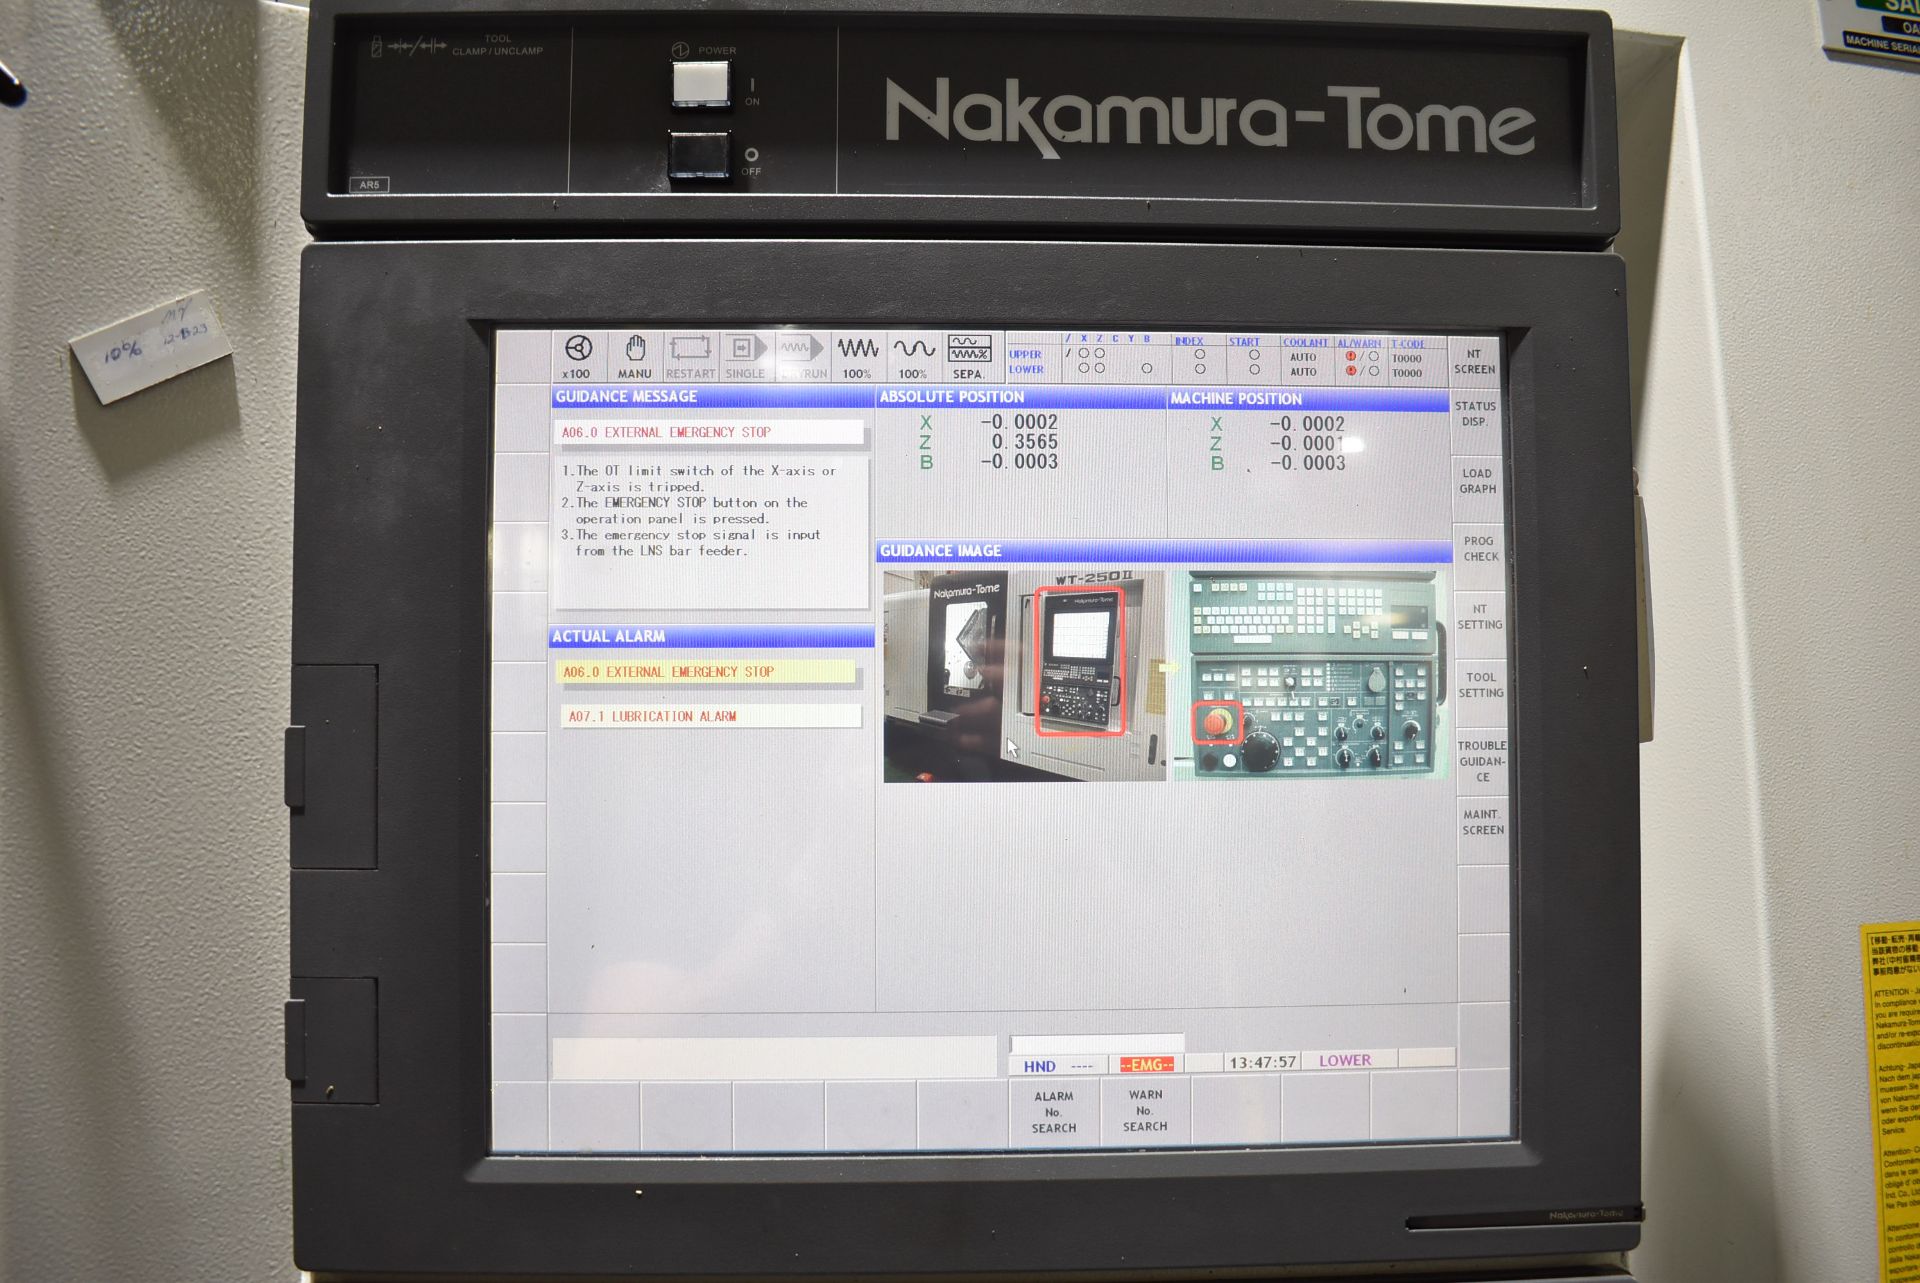 NAKAMURA-TOME (2013) WT-250 II S MULTI-AXIS OPPOSED SPINDLE AND TWIN TURRET CNC MULTI-TASKING CENTER - Image 8 of 15